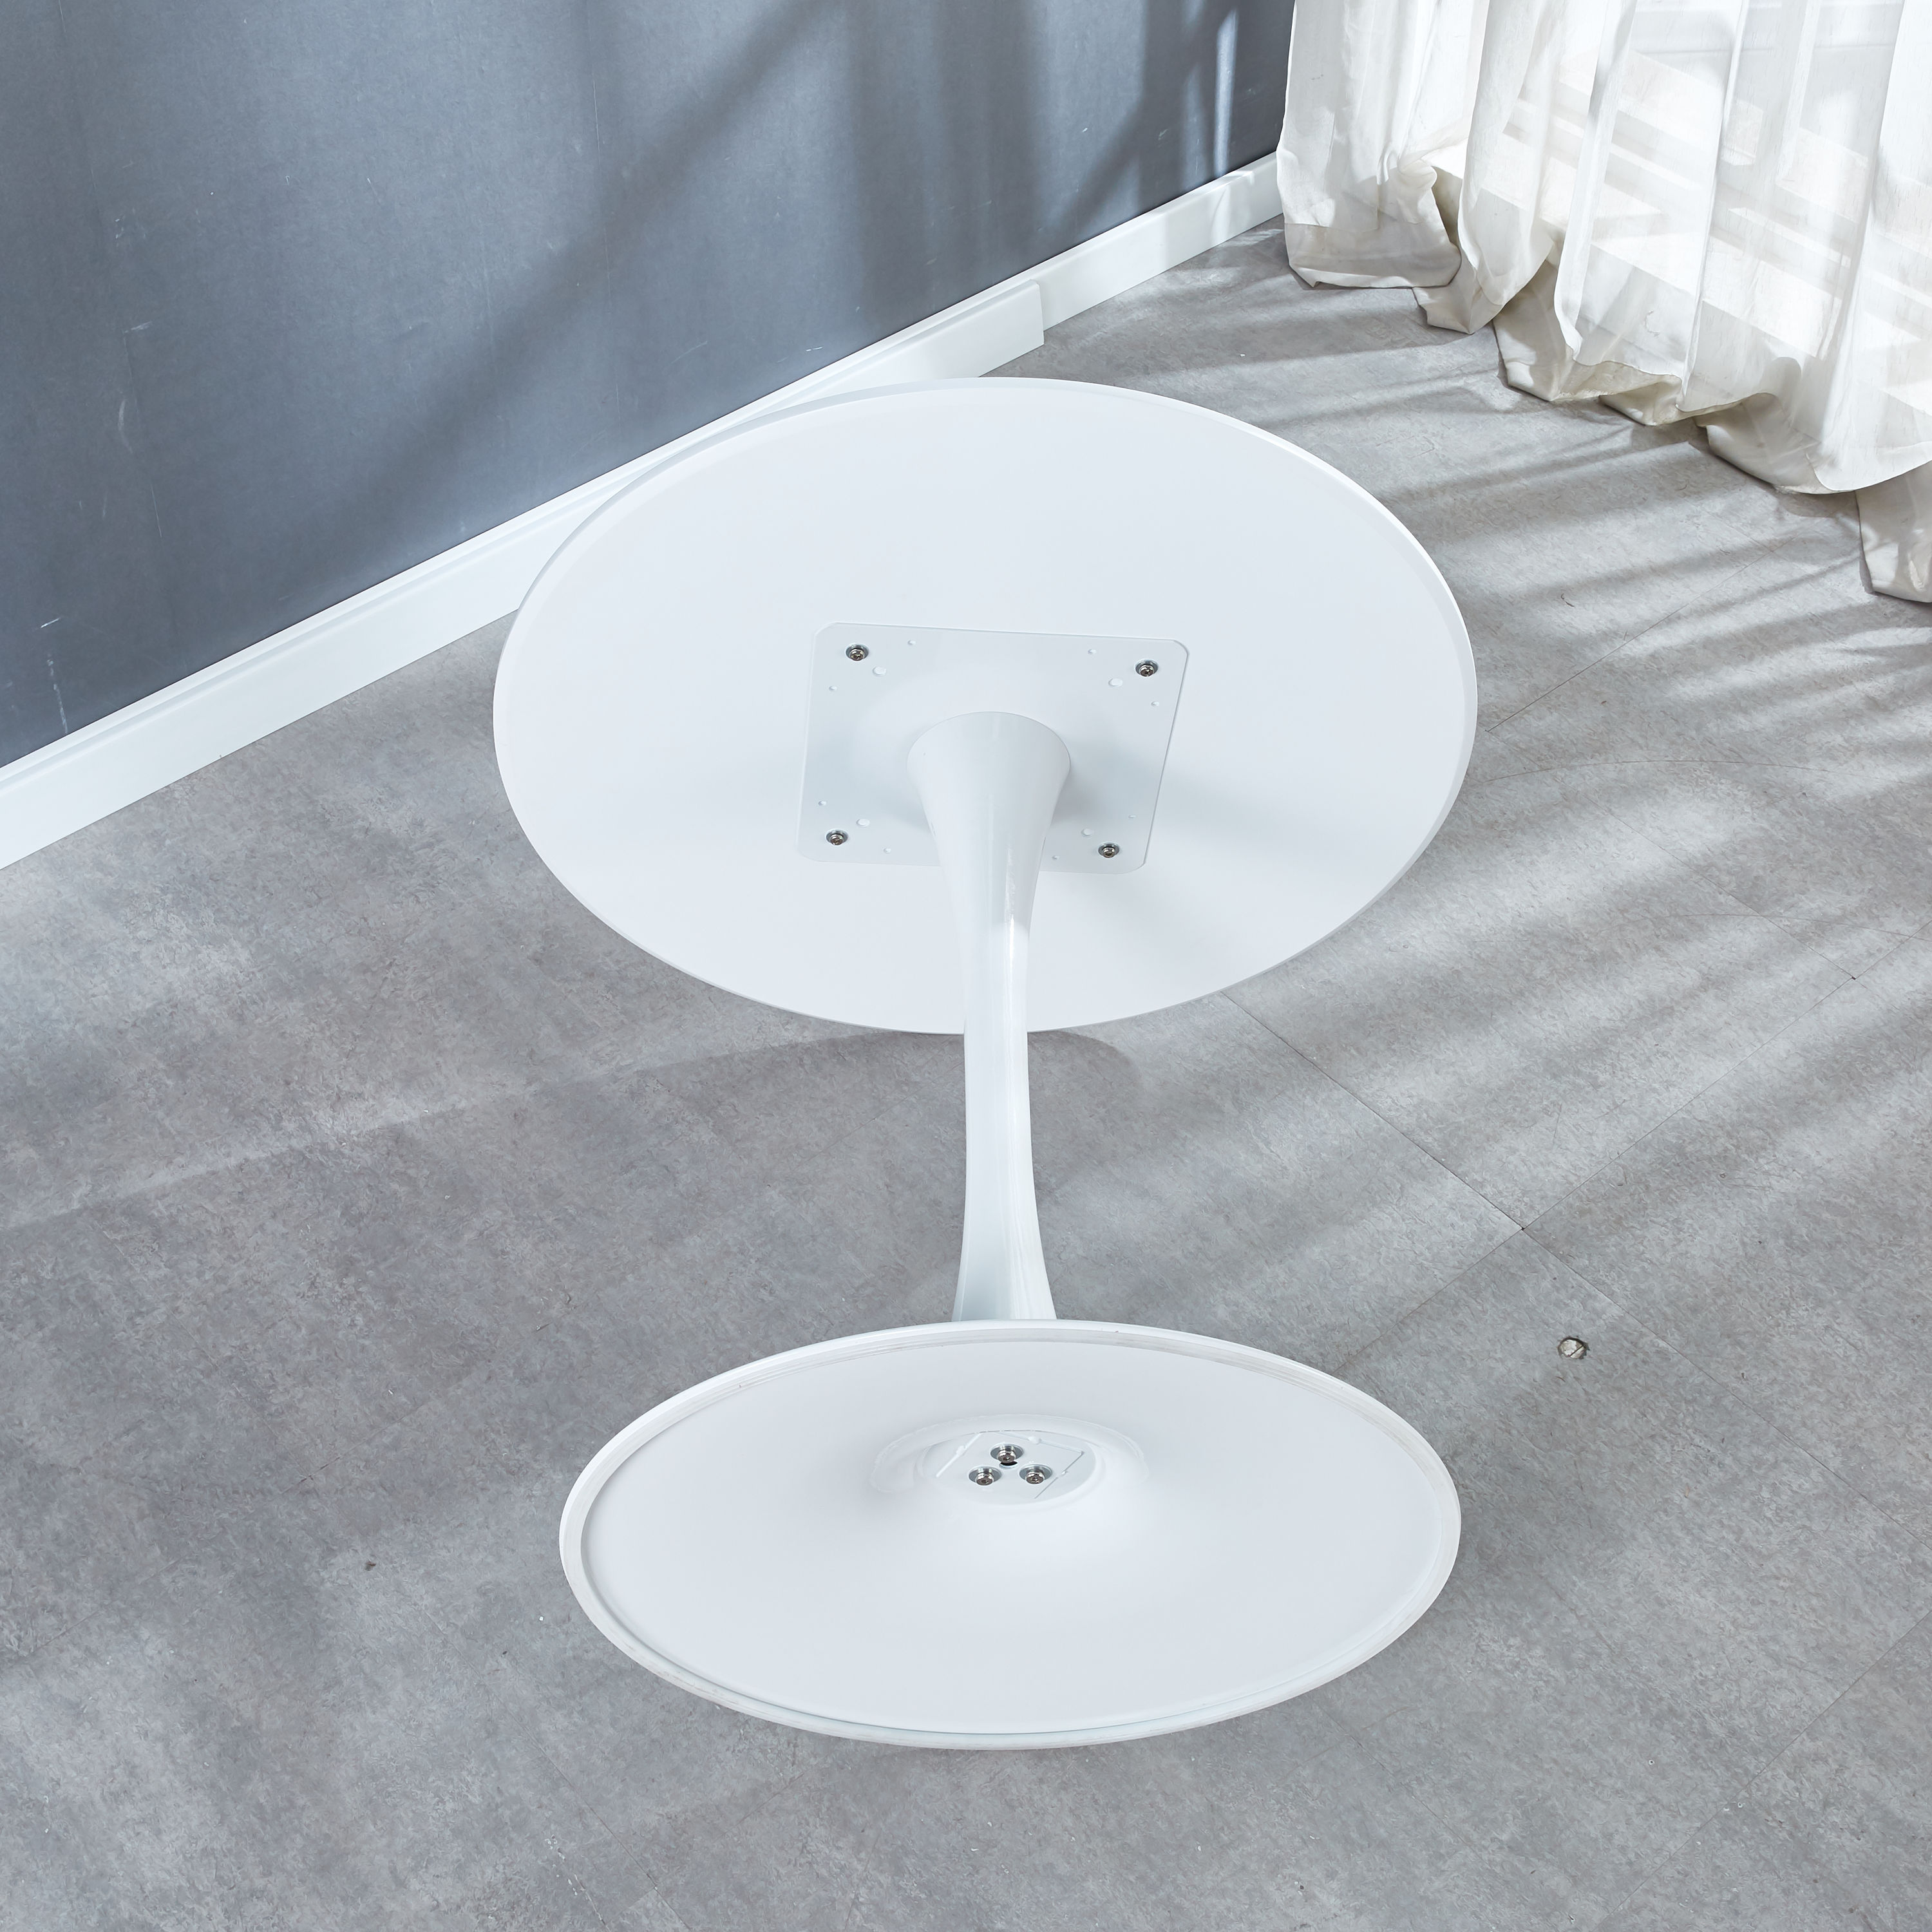 CASAINC White Round Contemporary/Modern Dining Table, Mdf with White ...